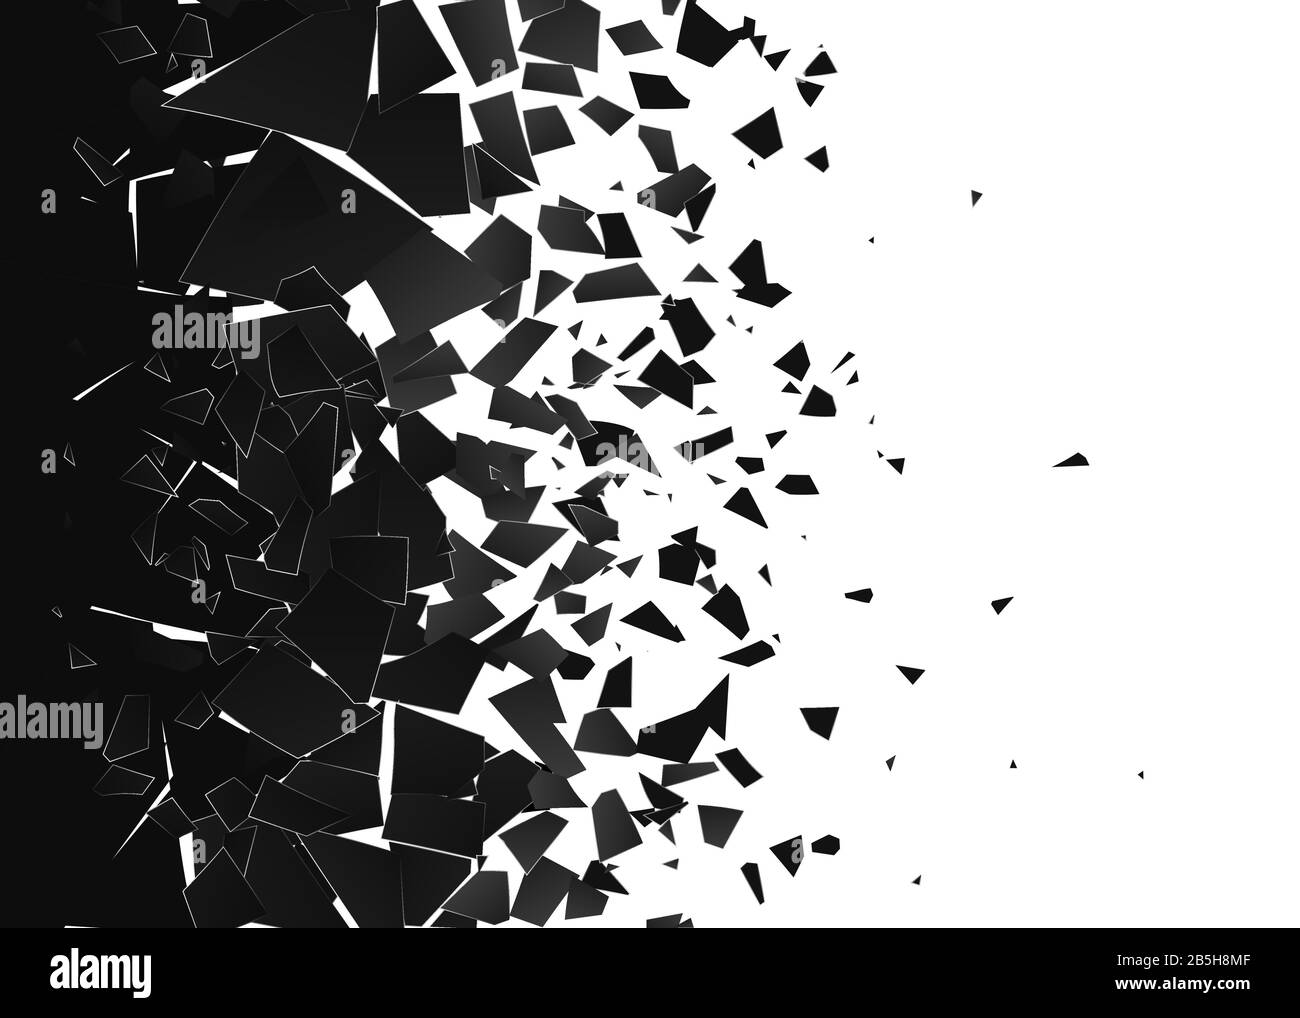 Abstract cloud of pieces and fragments after explosion. Demolition surface. Shatter and destruction effect. Vector illustration Stock Vector